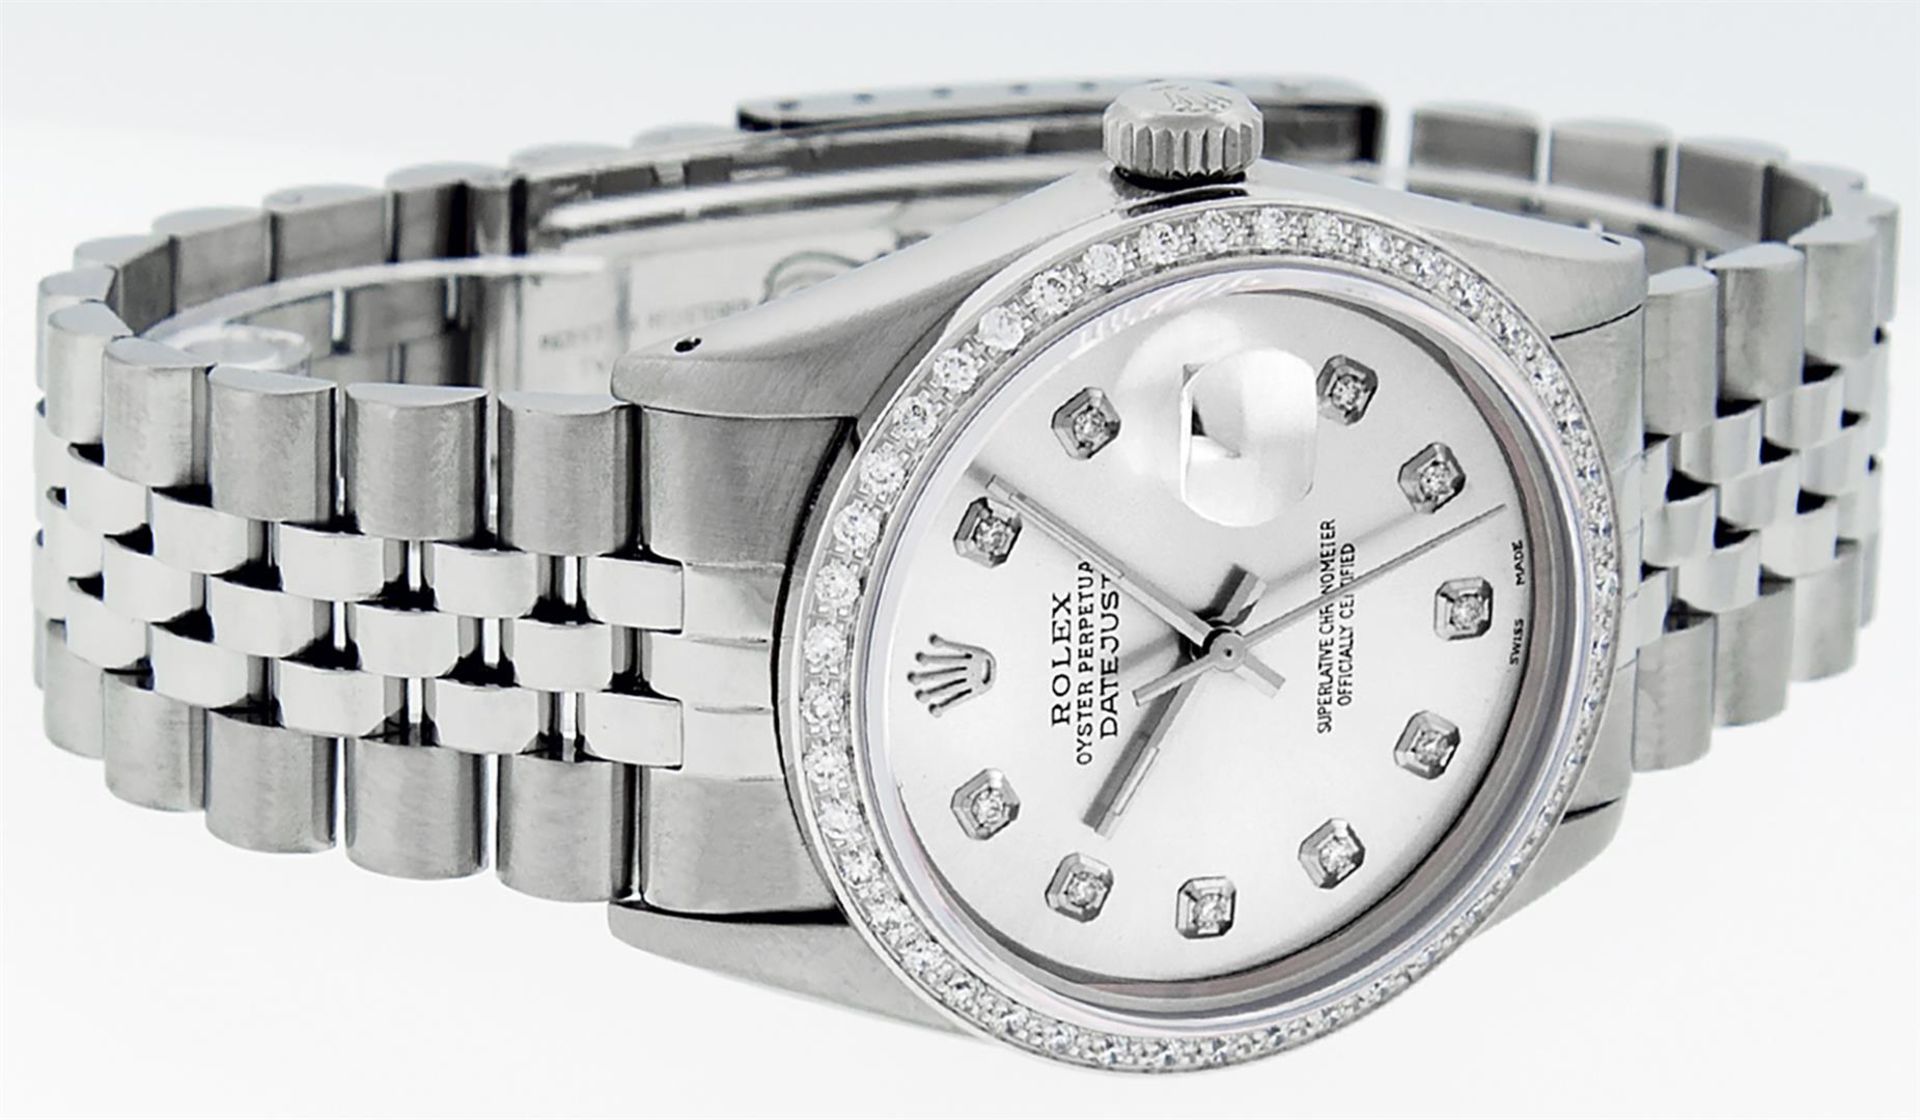 Rolex Mens Datejust 36 Stainless Steel Silver Diamond Oyster Datejust Wristwatch - Image 4 of 9